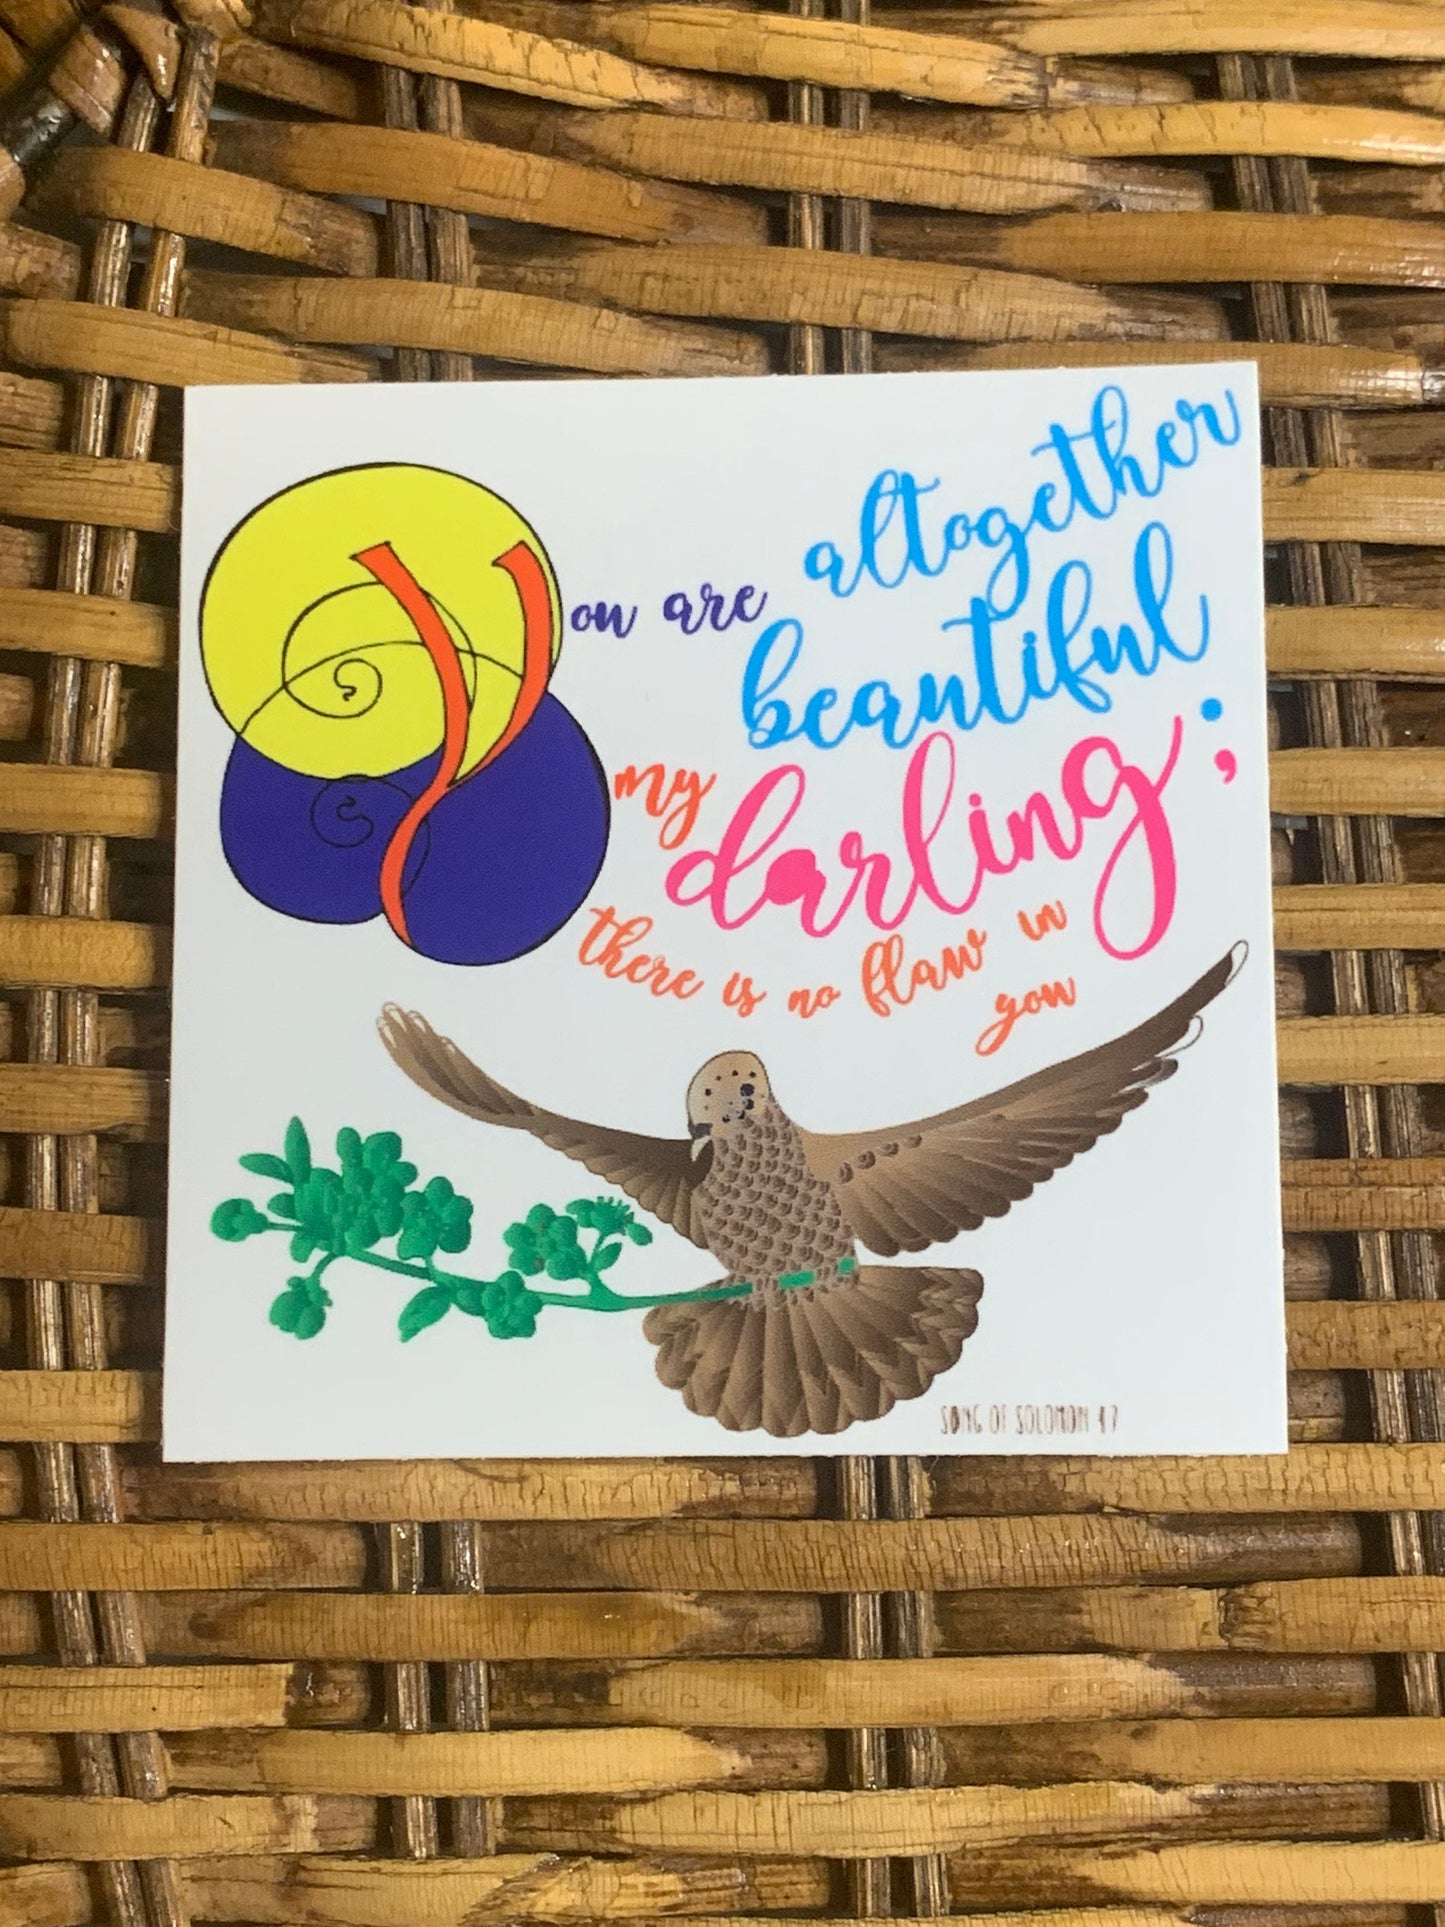 You Are Altogether Beautiful My Darling, There Is No Flaw In You Vinyl Sticker, Vinyl Decal, Laptop Sticker, Recovery Sticker, Encouragement